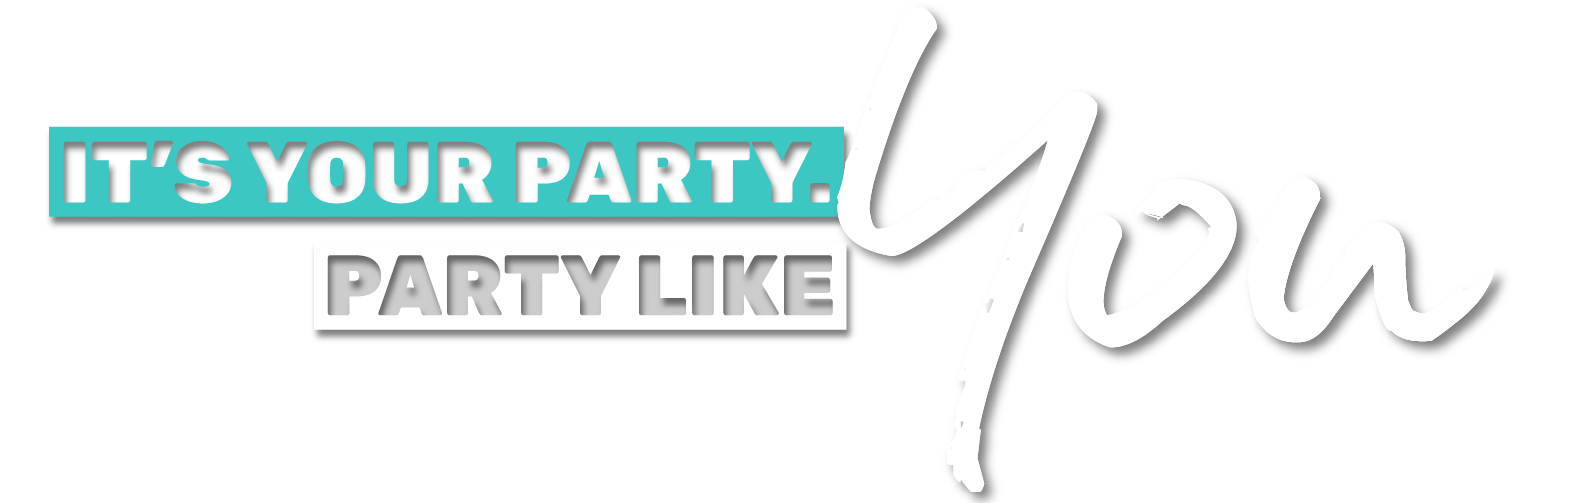 Party with Complete Jacksonville